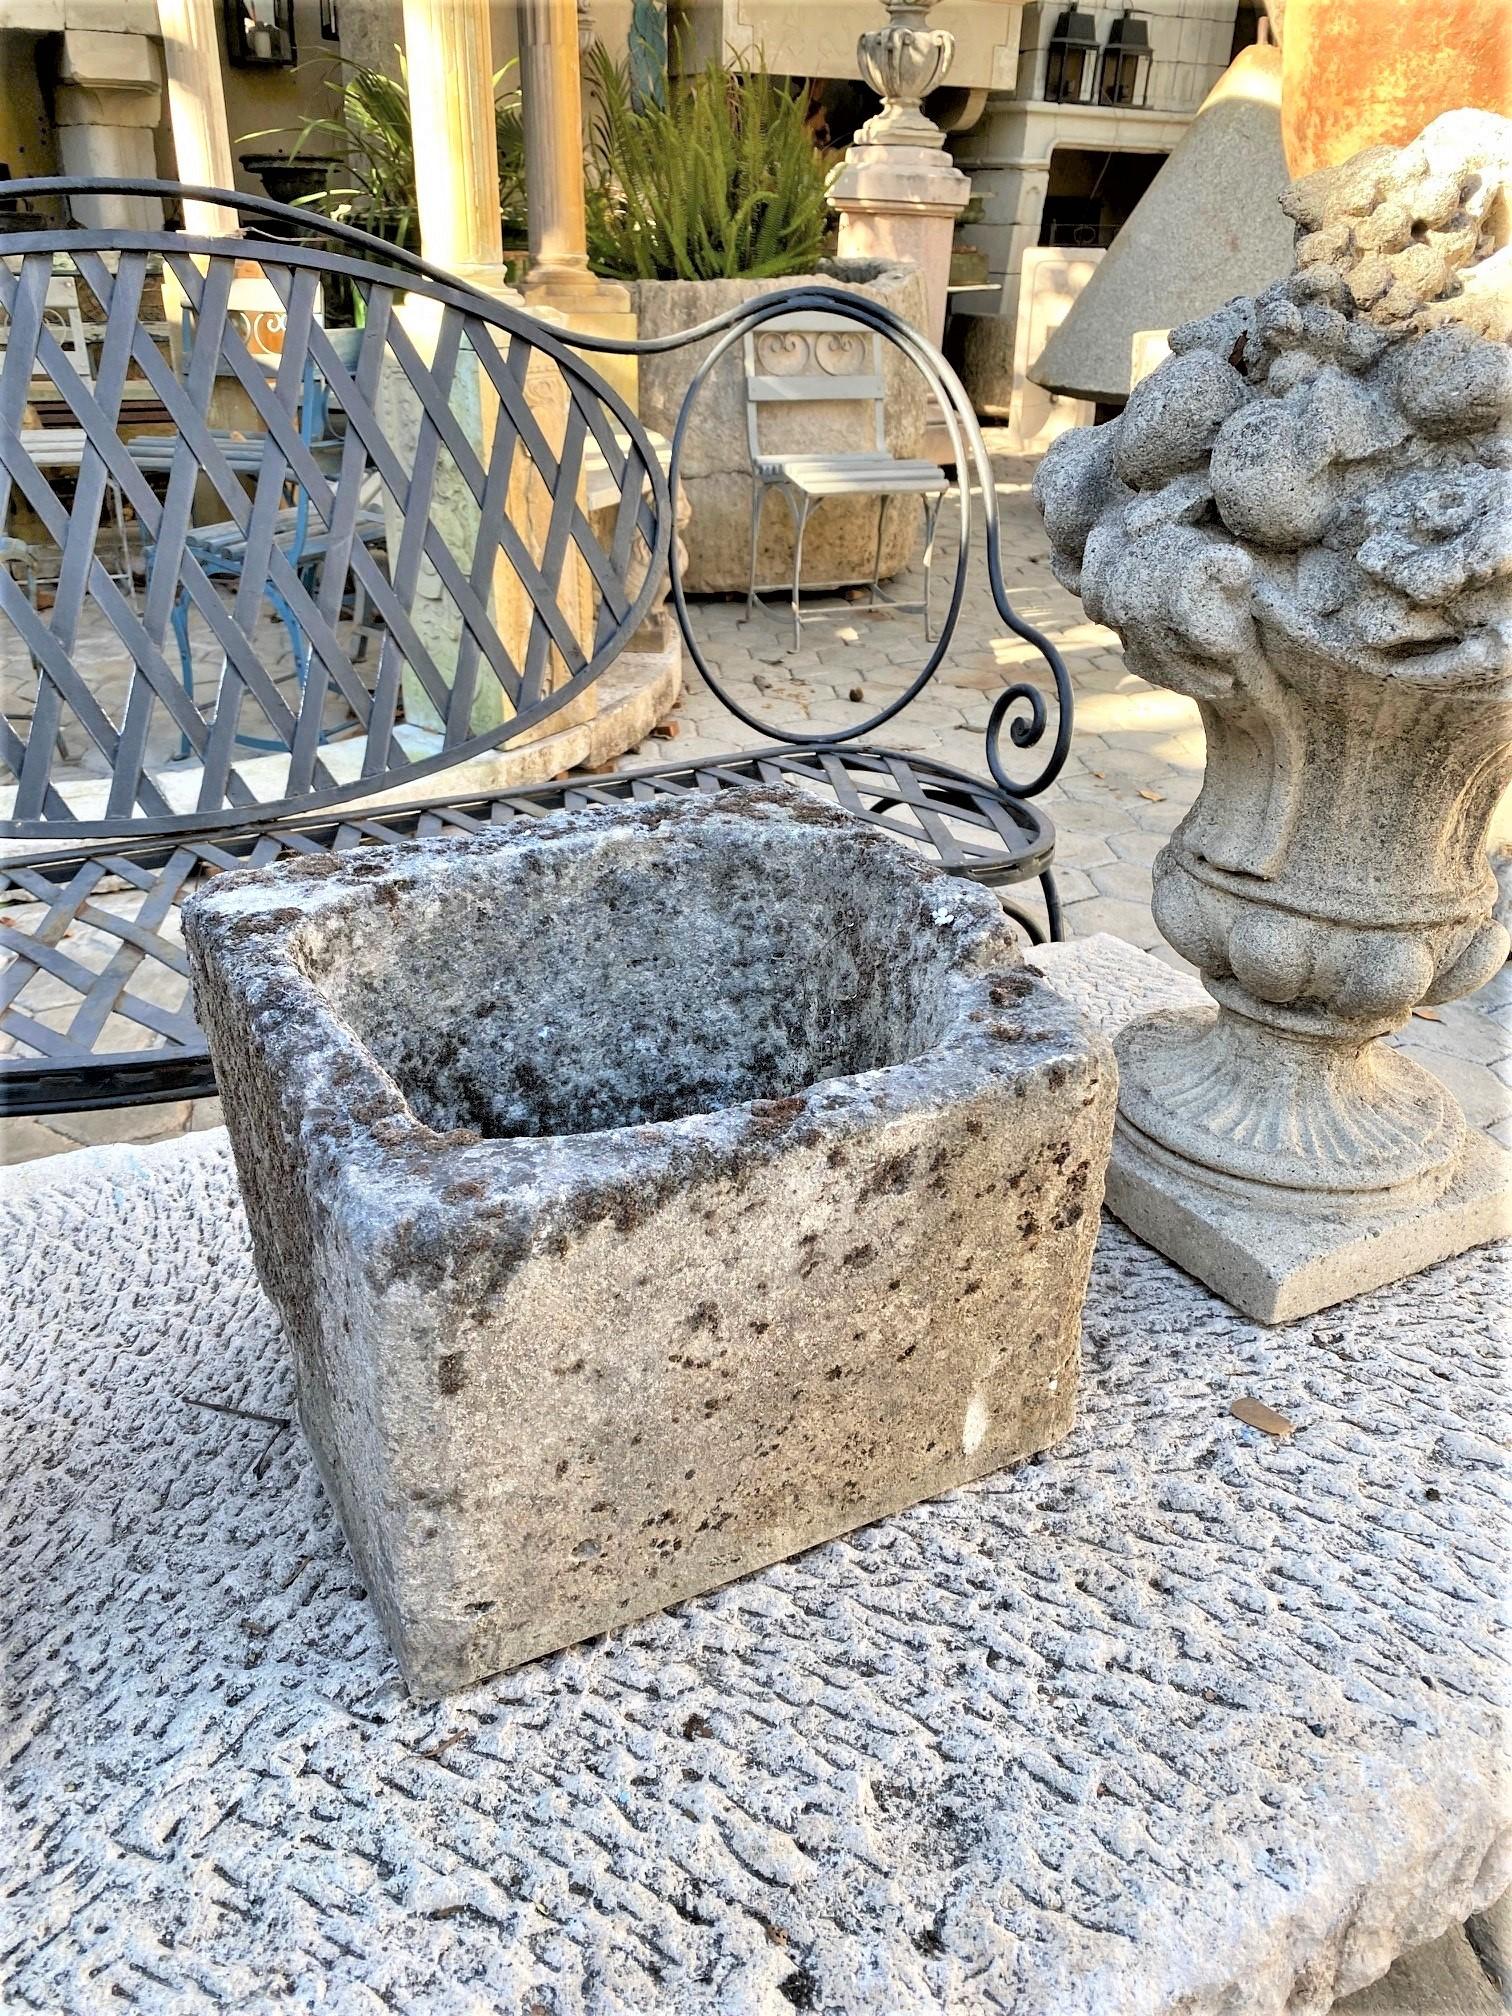 18th 19th Century small water fountain basin of hand carved stone container. Color and patina keeps changing with the light and the seasons. This trough sink could be installed with a simple bronze metal spout or a carved stone fountain head, we